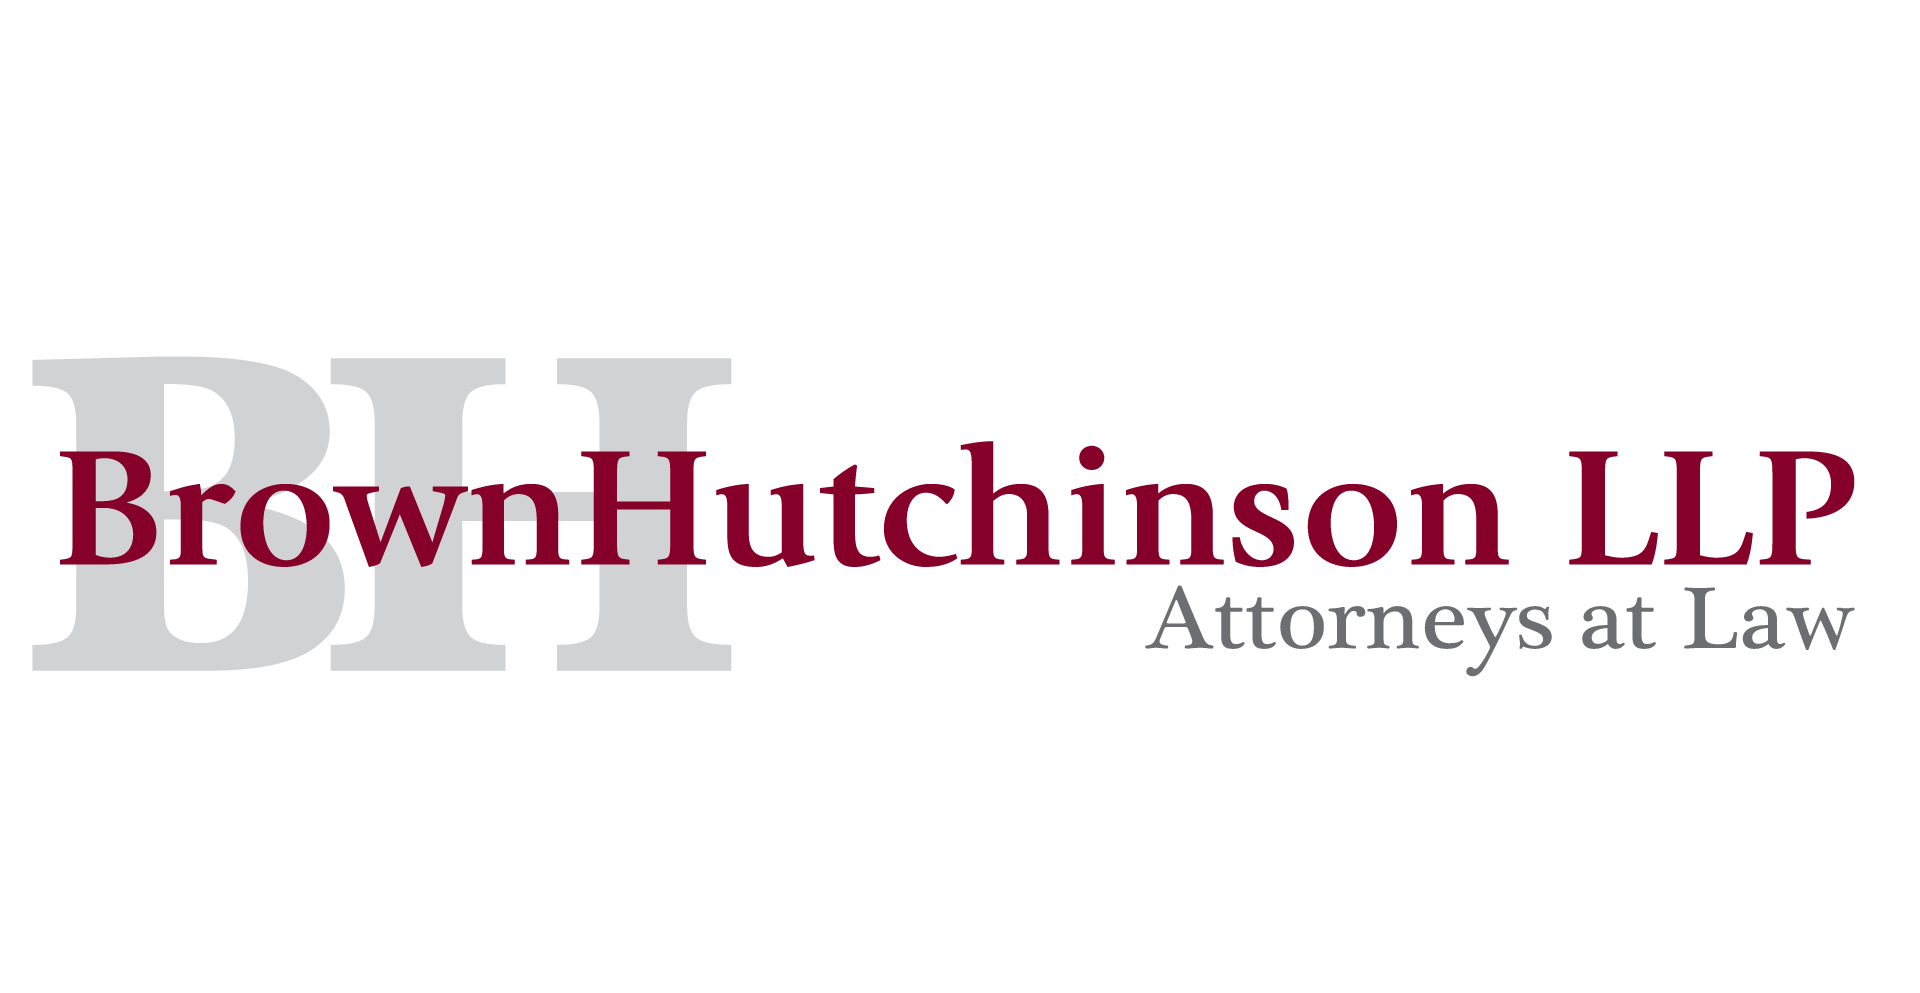 BrownHutchinson LLP is are Attorneys at Law in The CrossRoads Building.